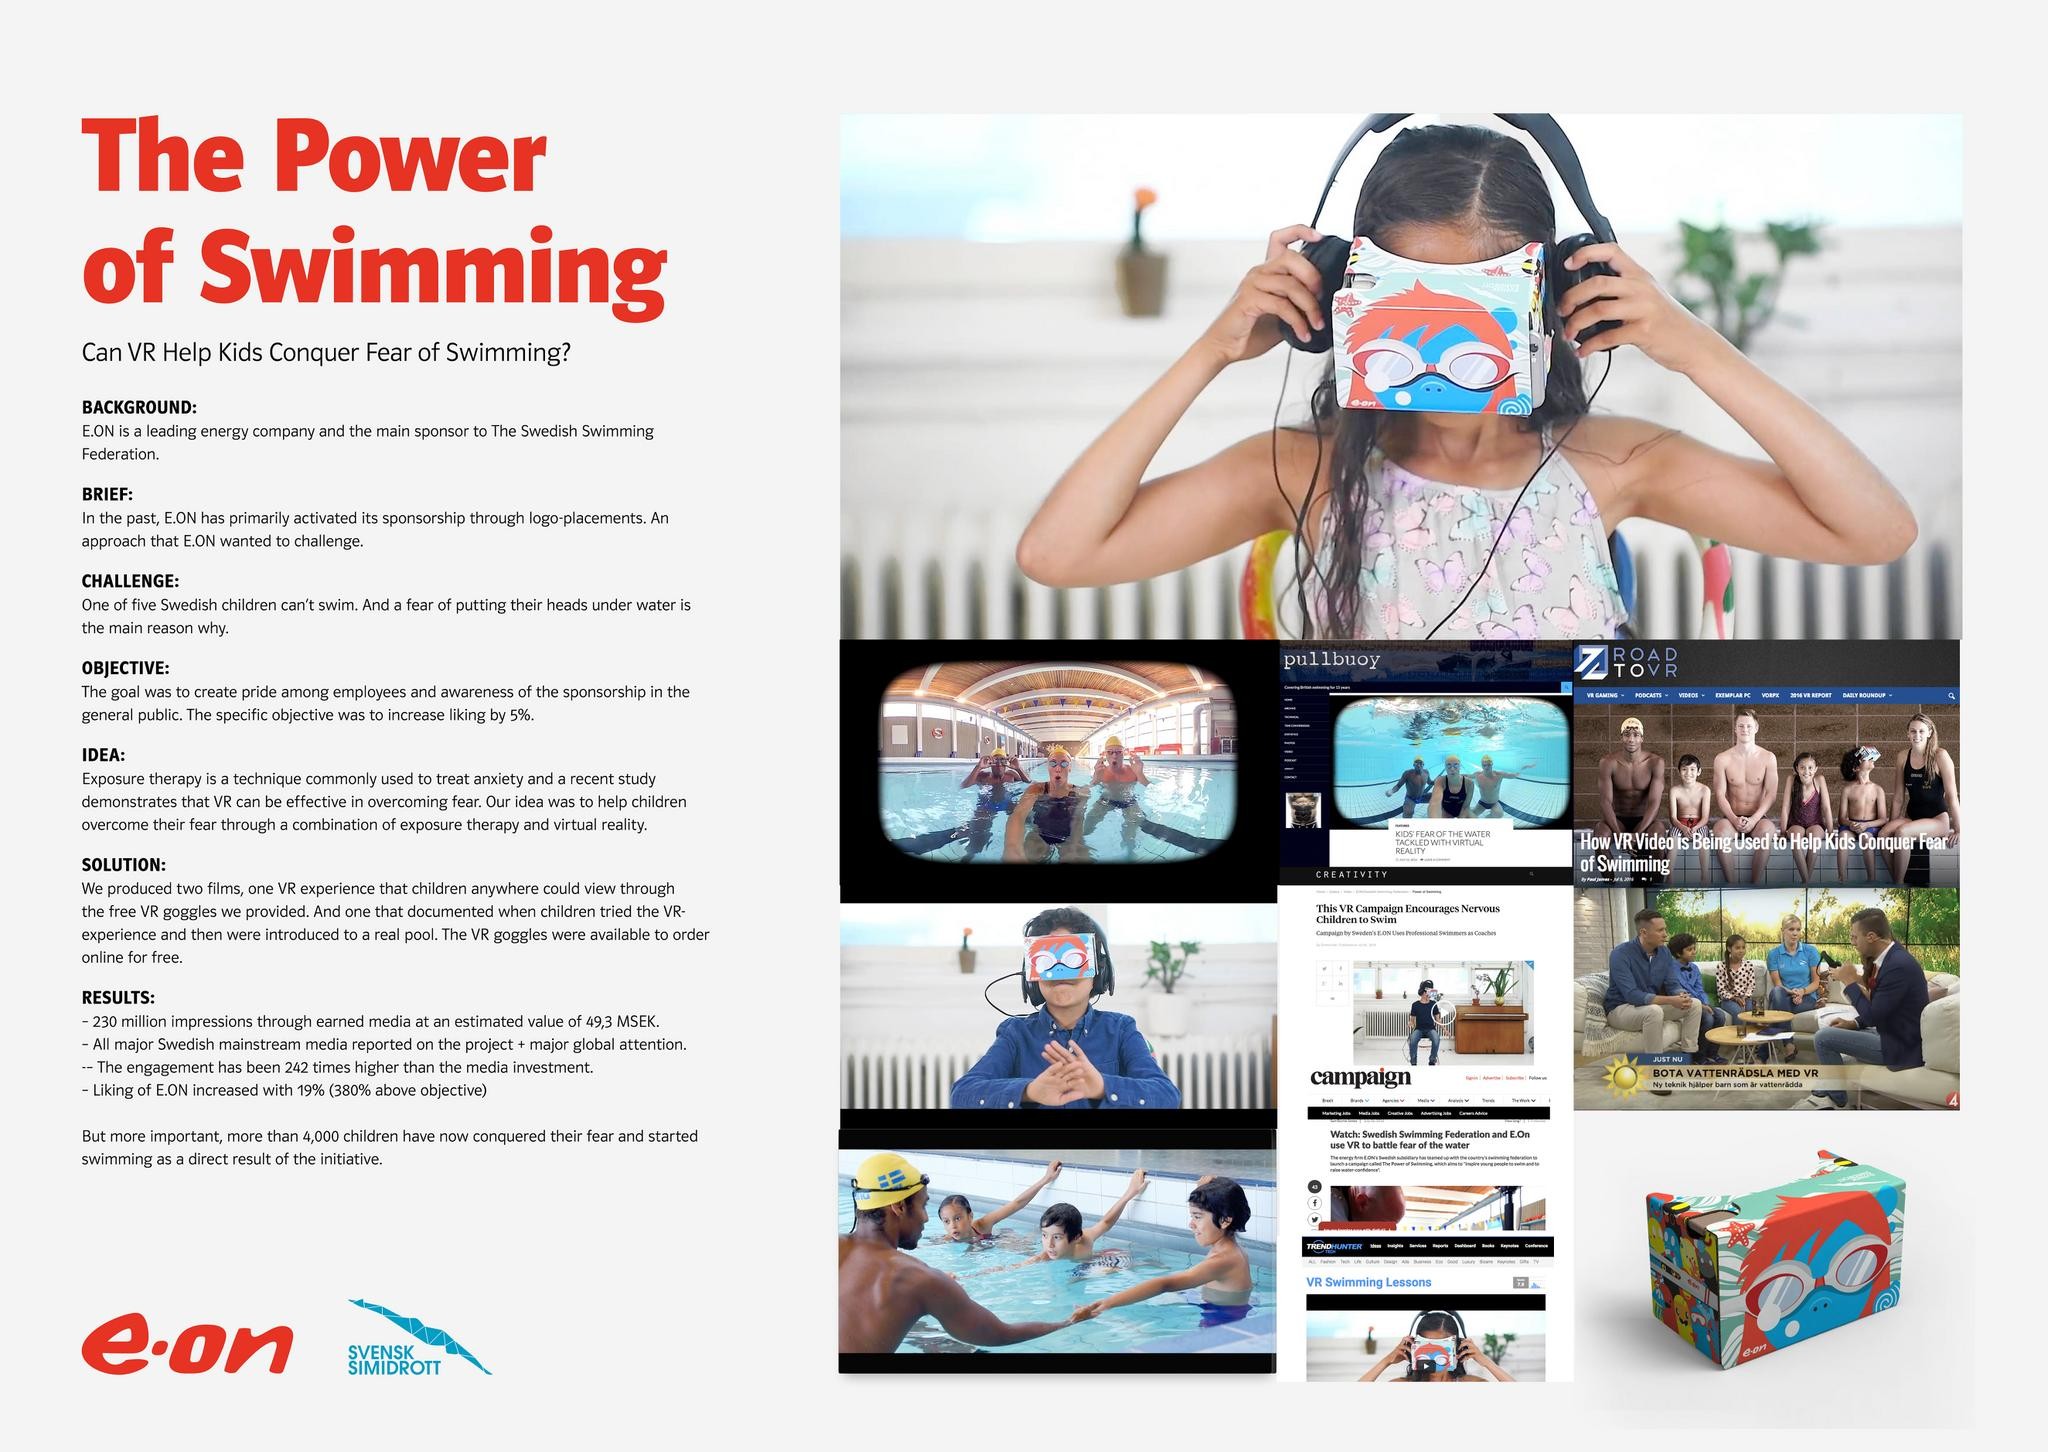 The Power of Swimming (Can VR Help Cure Kids’ Fear of Water?)